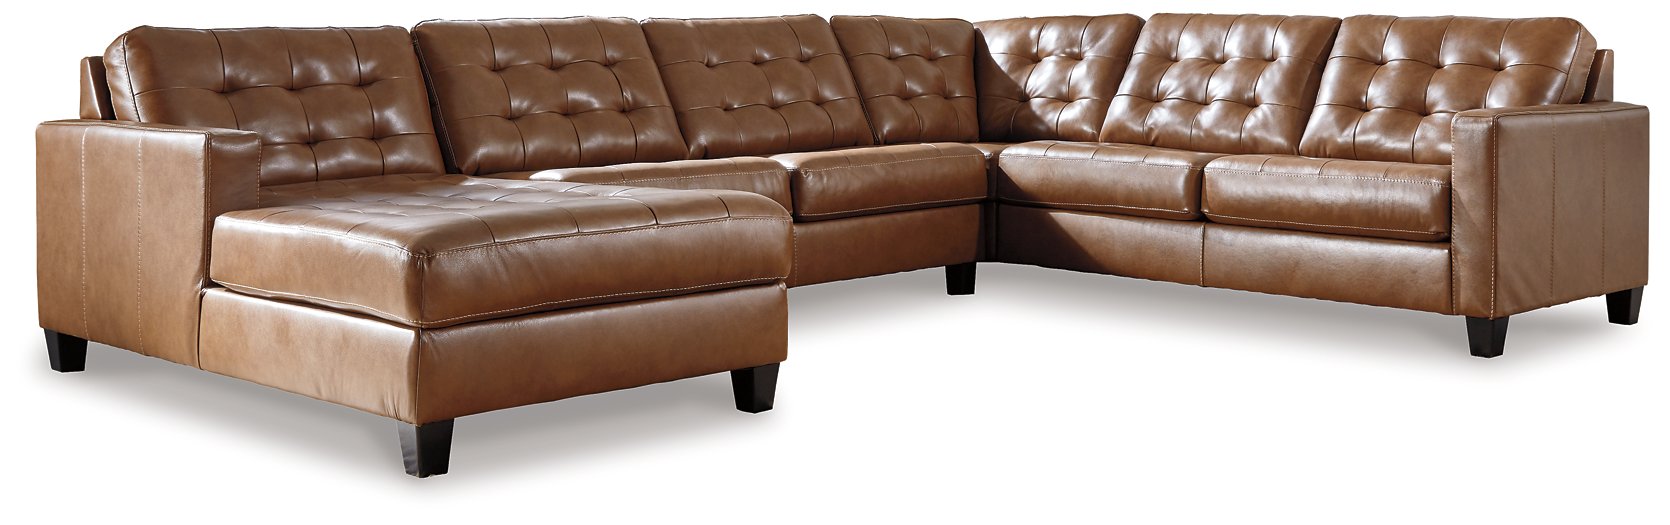 Baskove Sectional with Chaise - Evans Furniture (CO)